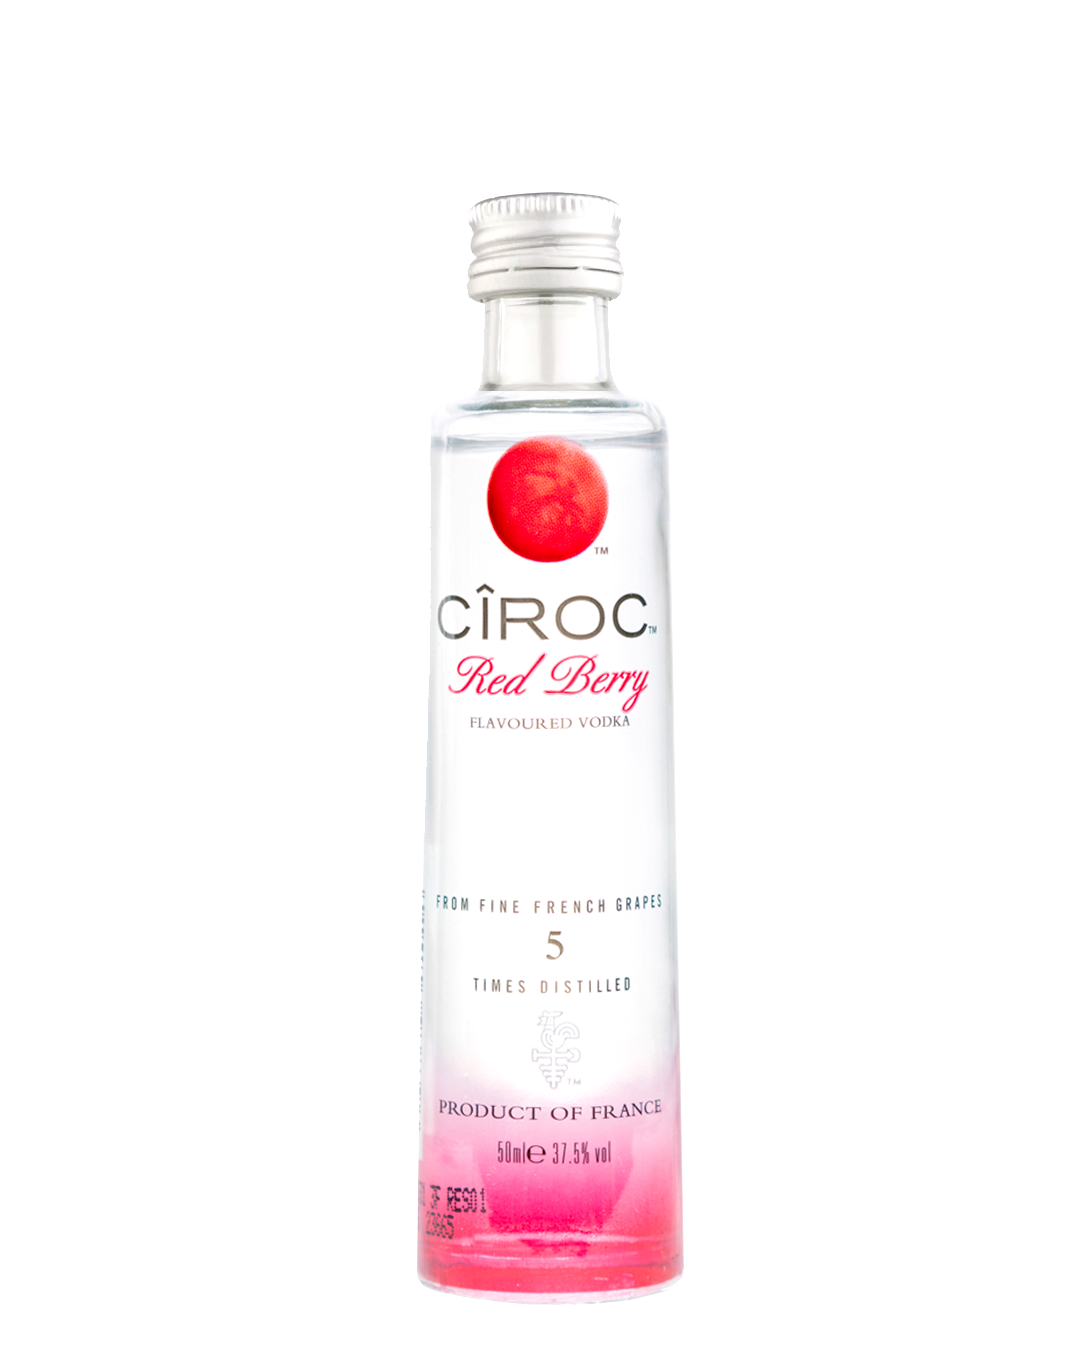 Ciroc_Red_Berry_miniature_5cl